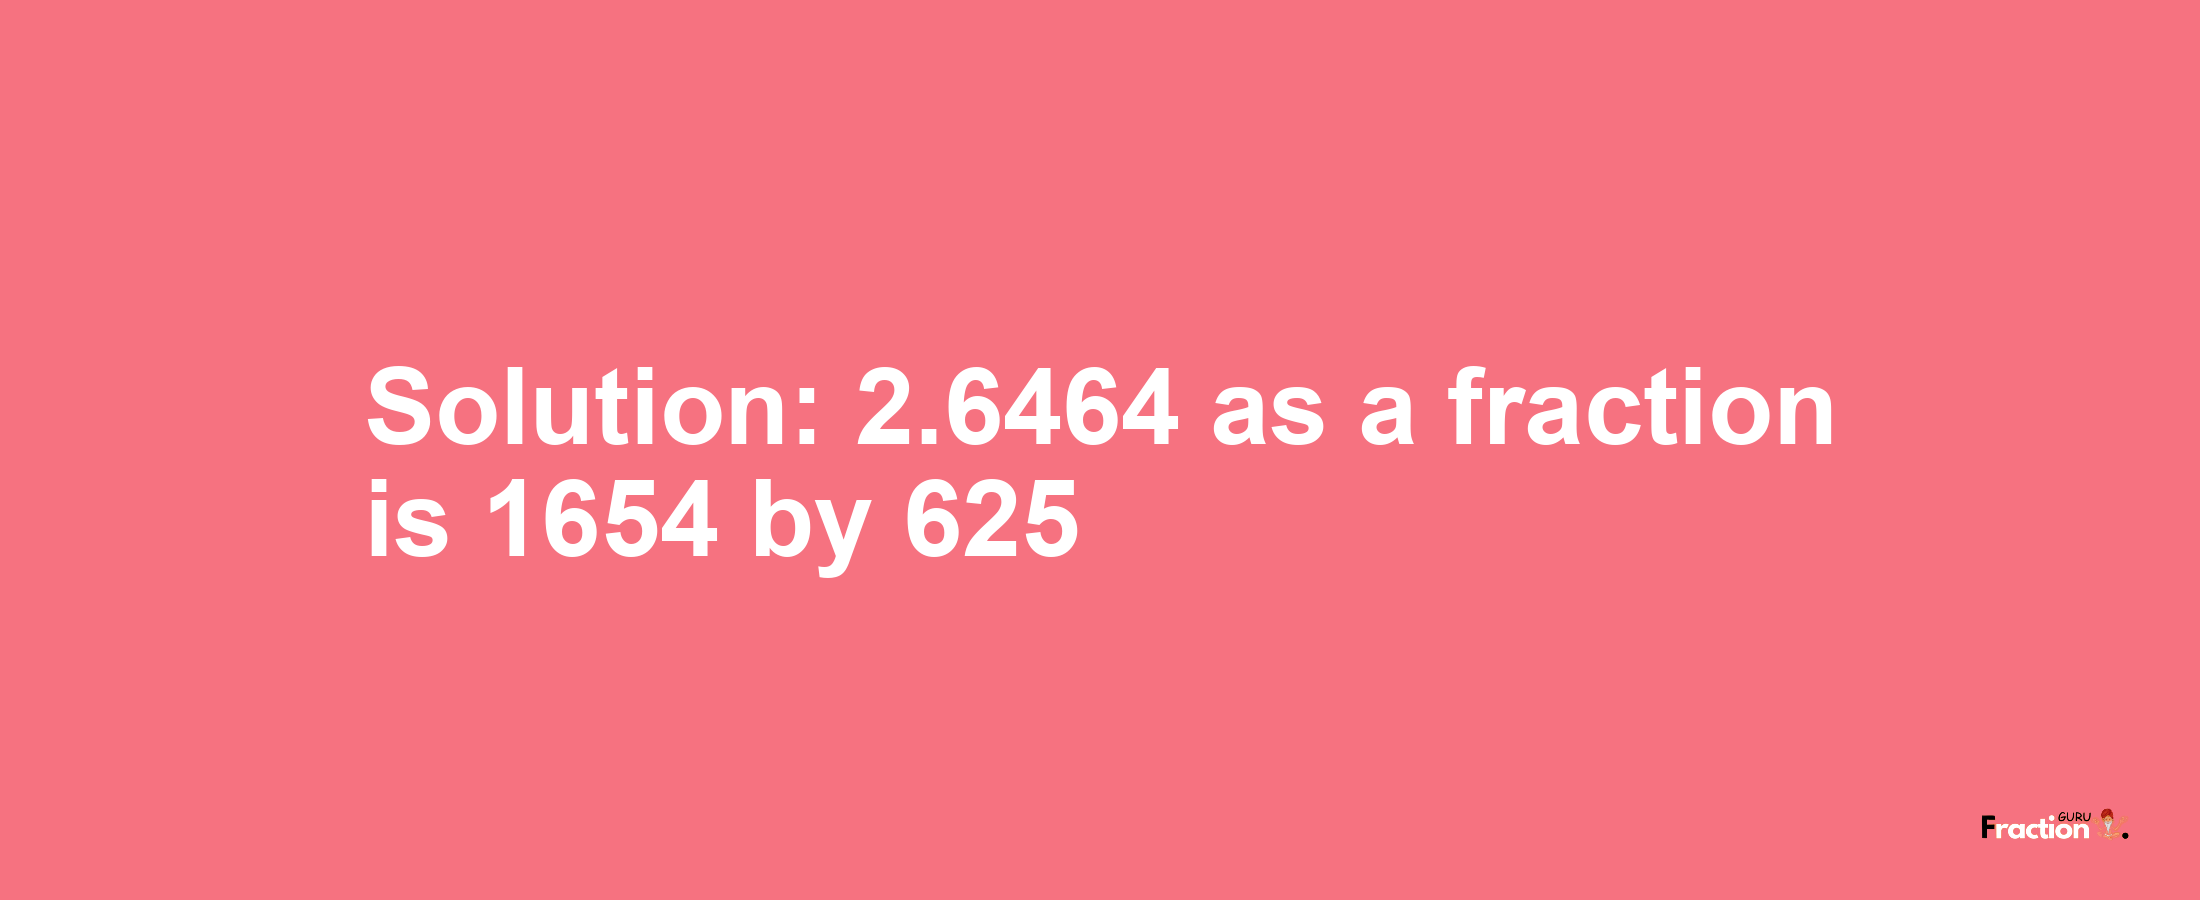 Solution:2.6464 as a fraction is 1654/625